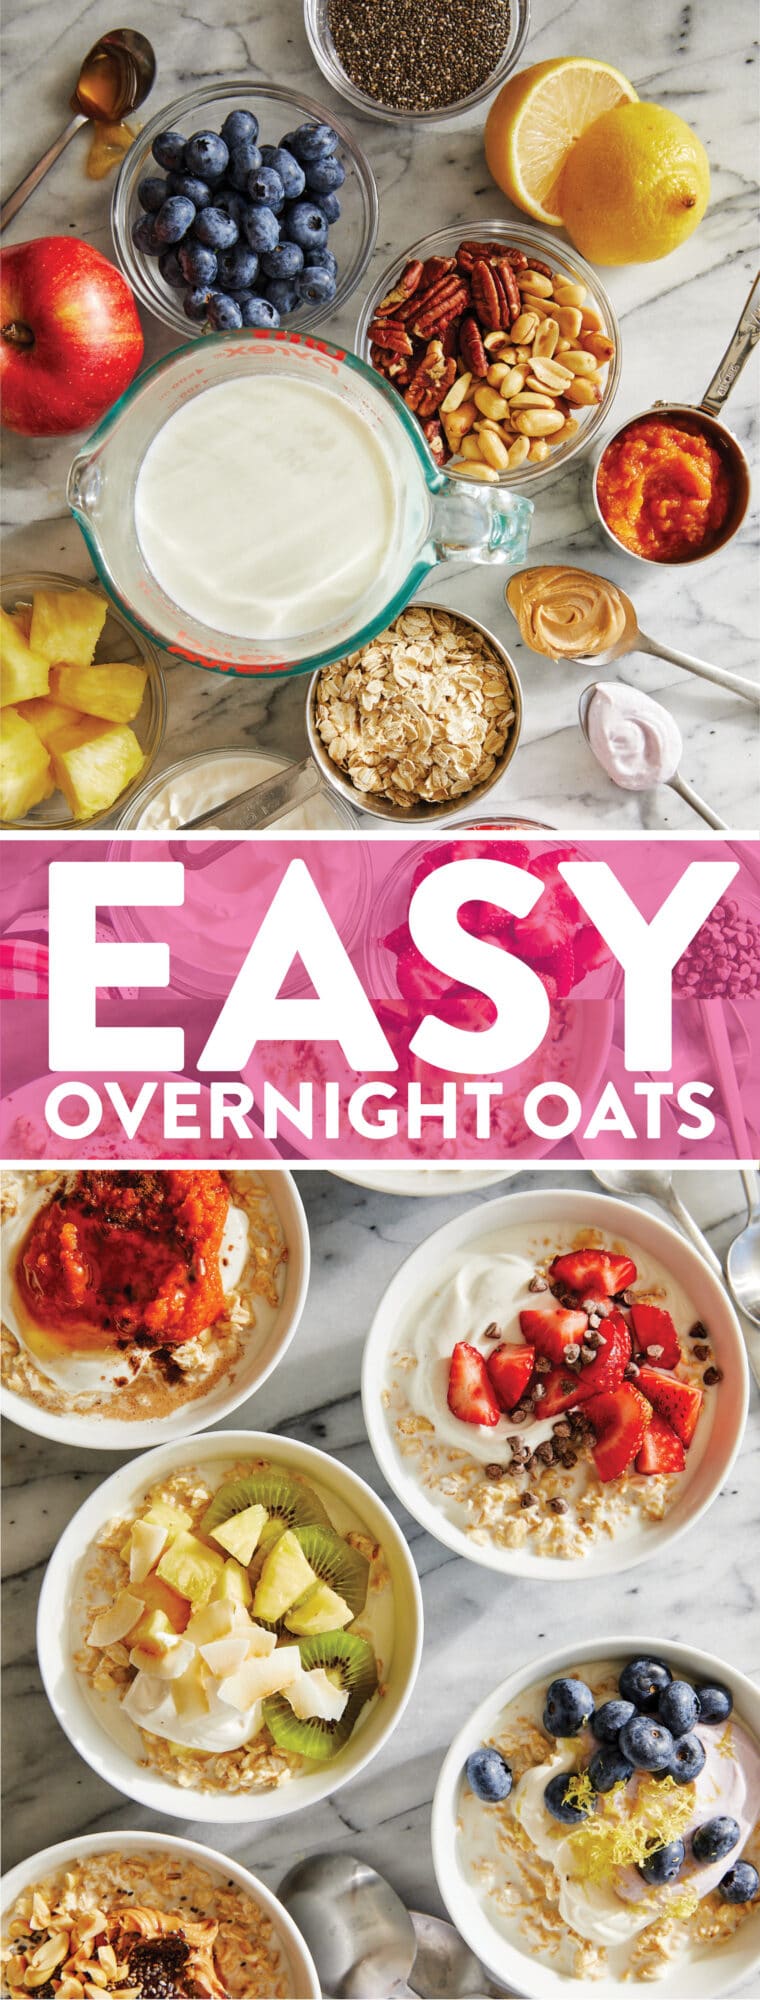 Easy Overnight Oats - Soak your oats overnight for the quickest breakfast all week long! You can double/triple the recipe. It's just so easy!